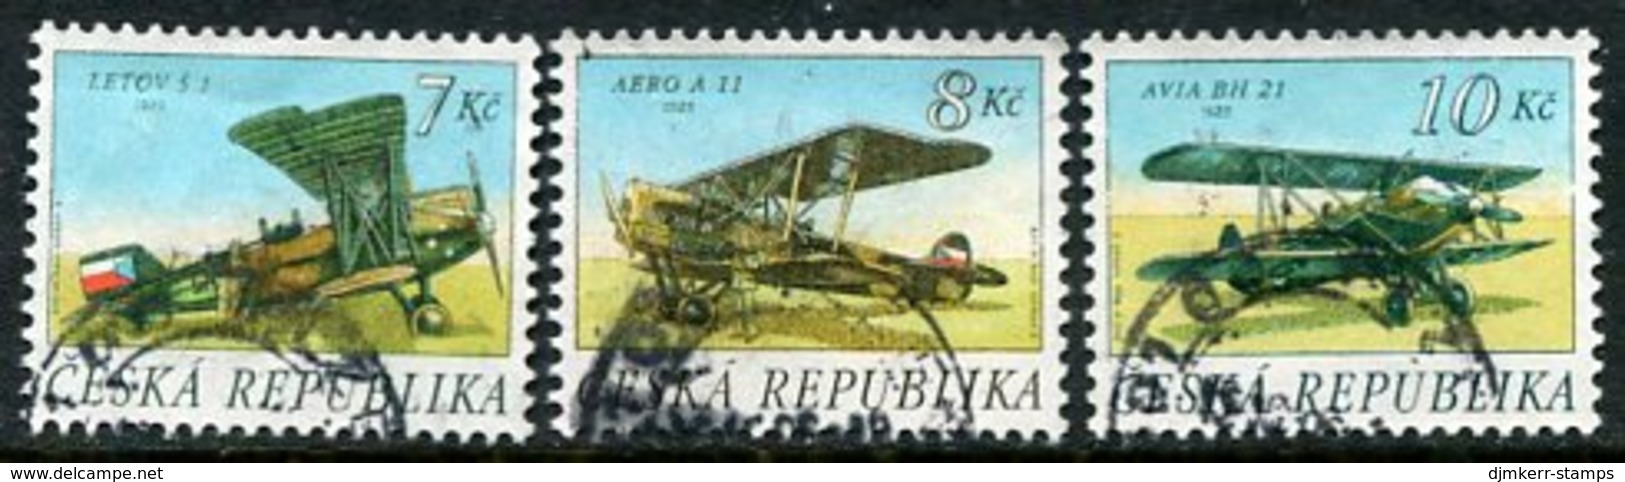 CZECH REPUBLIC 1996 Biplanes Used .  Michel 127-29 - Used Stamps